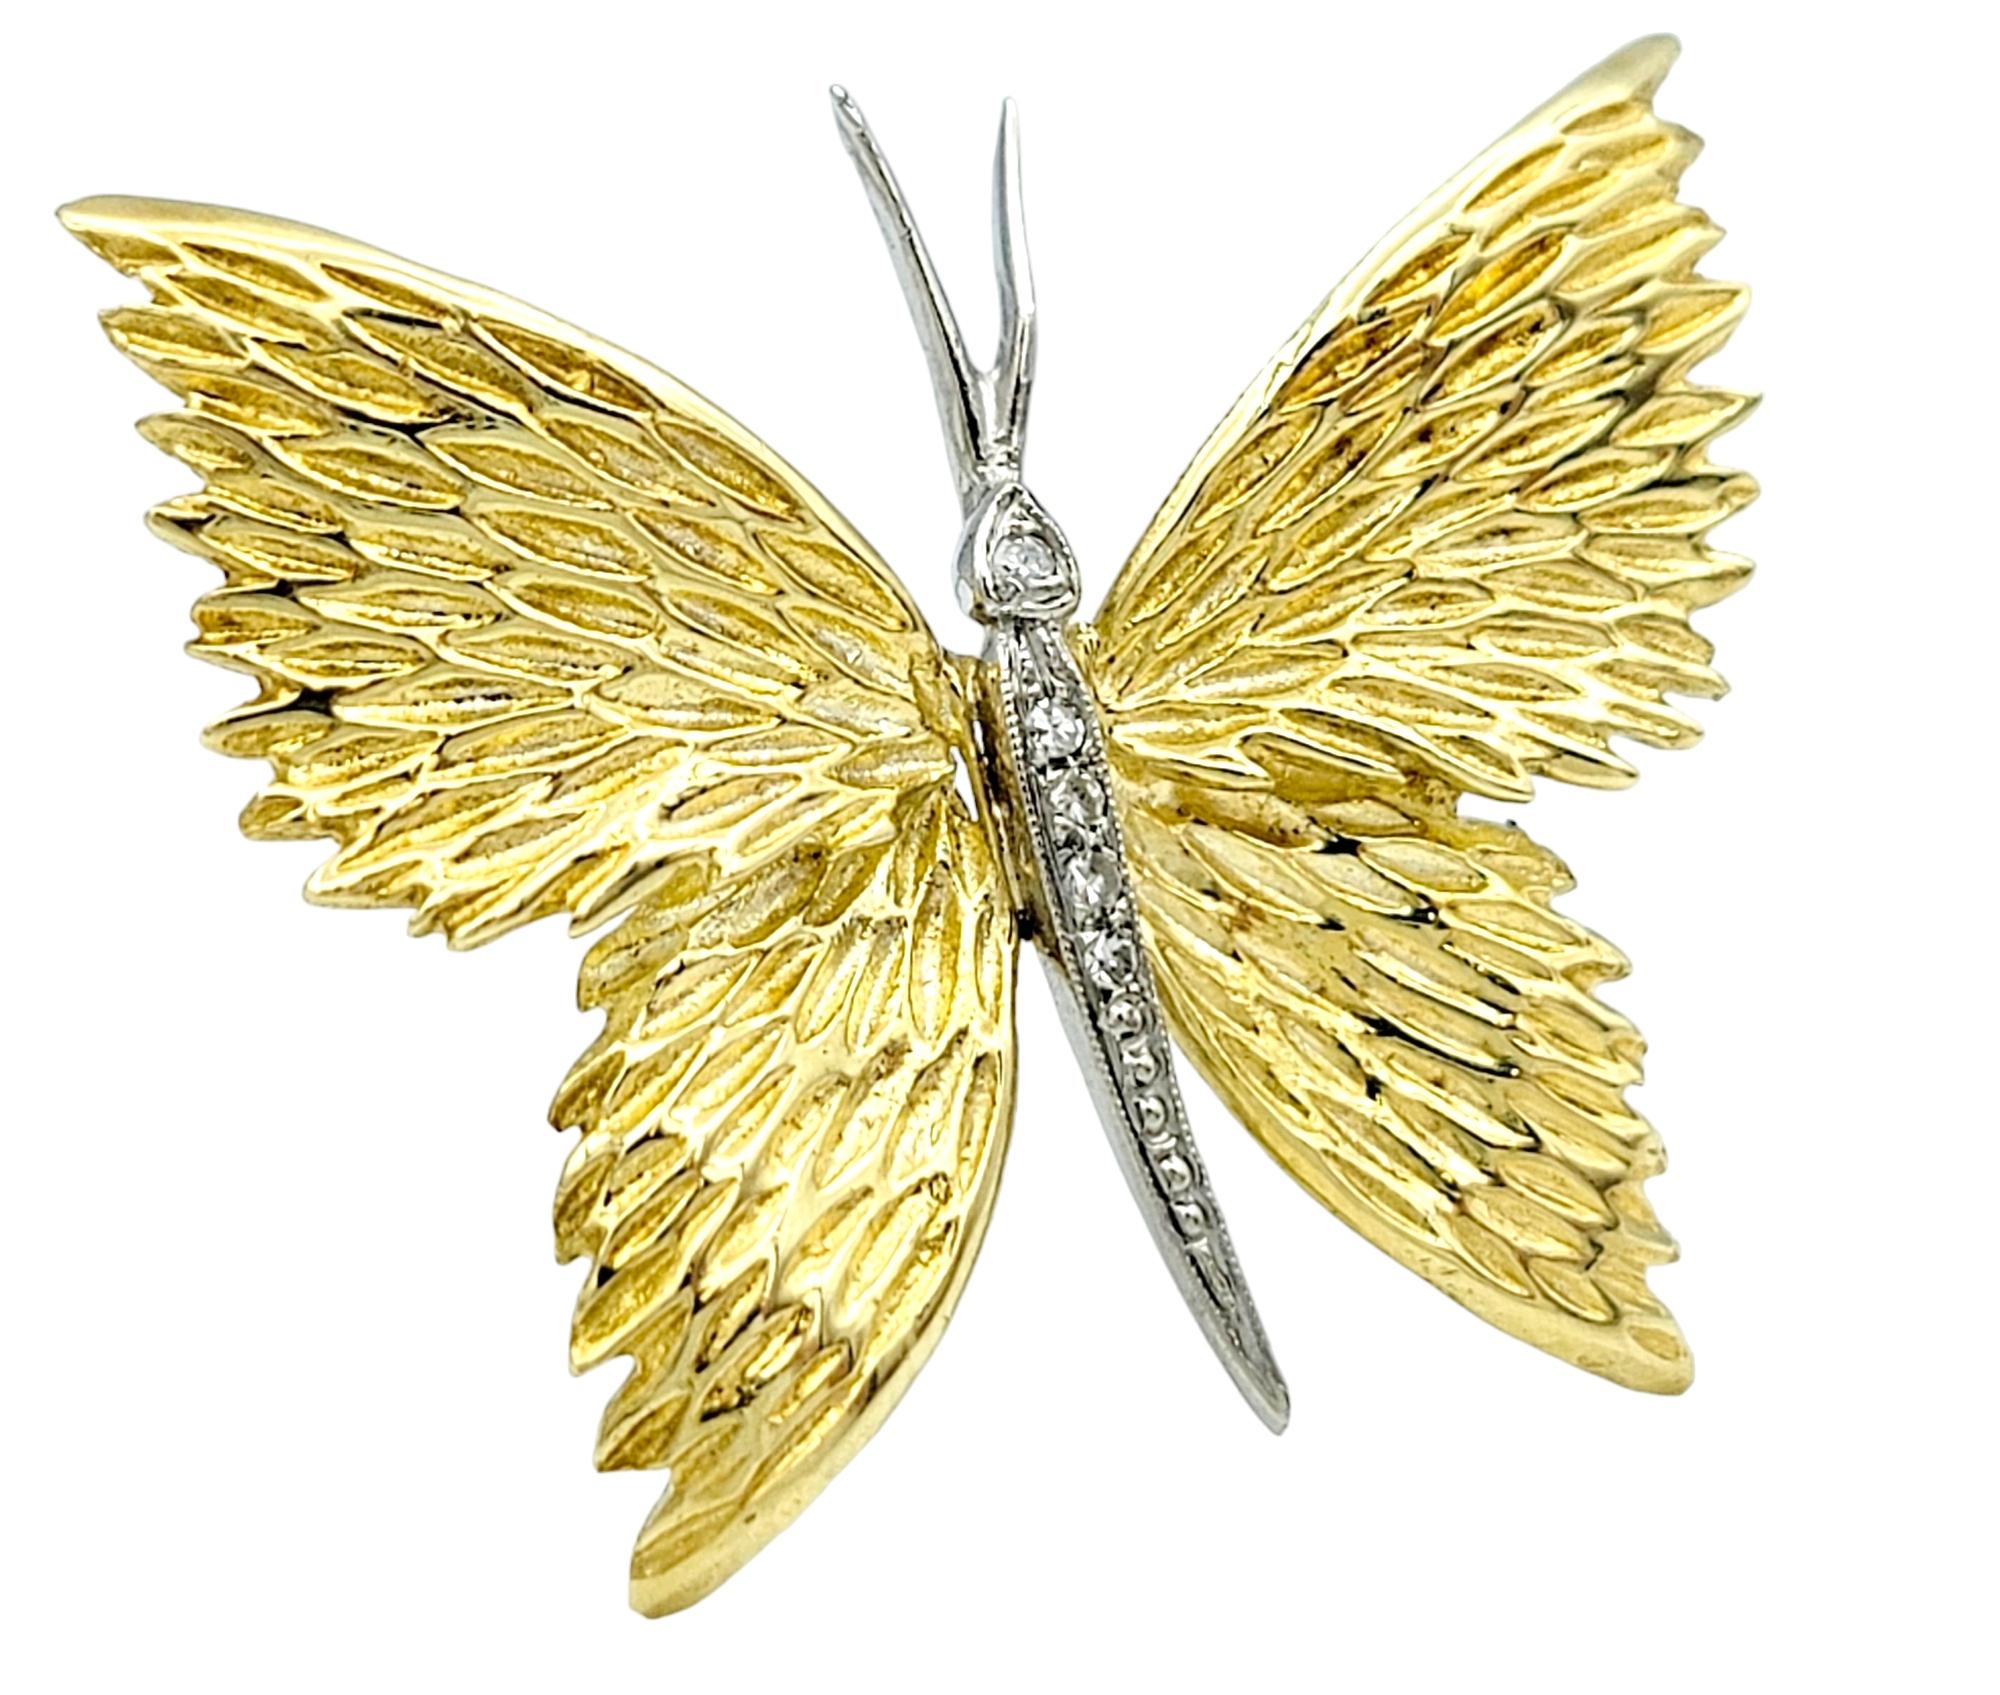 Elegance and nature converge in our exquisite yet simple butterfly brooch set in 18 karat gold. The brooch features wings adorned with textured grooves, creating a delicate interplay of light and shadow that mimics the intricate patterns found in